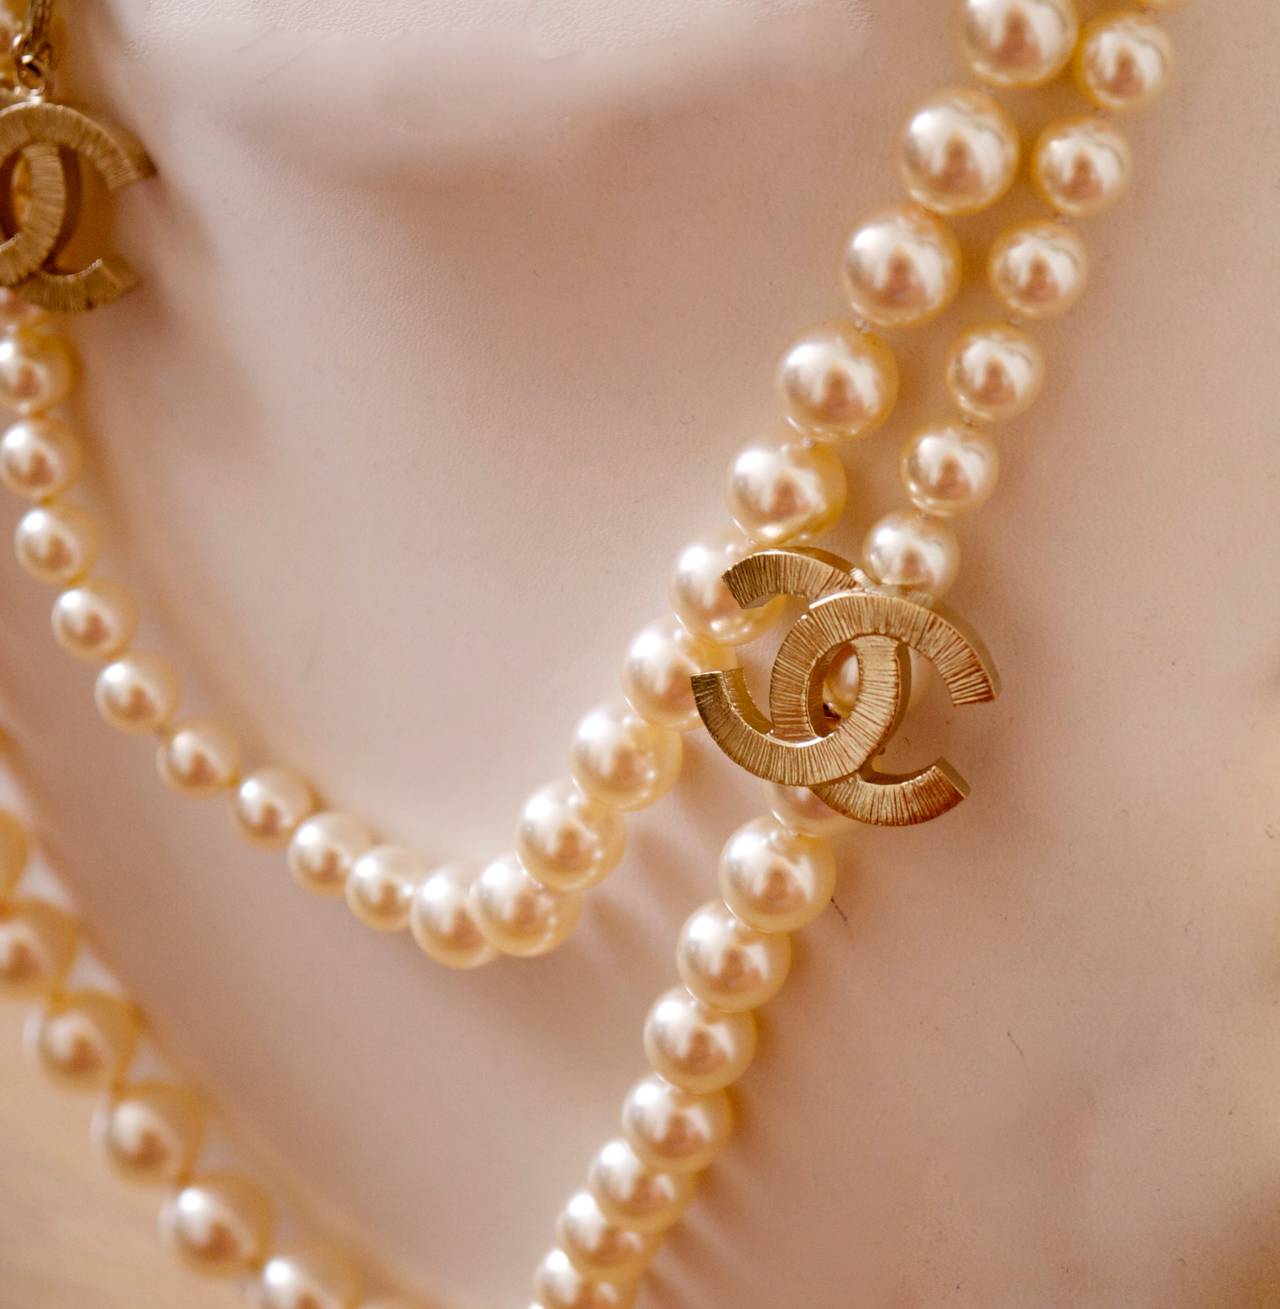 Spectacular pearl necklace by Chanel. 42 inches long with two CC logo charms along the strand. The pearls have graduated sizings along the strand with the two significant CC logo charms along the strand. There is a chain and clasp enclosure at the